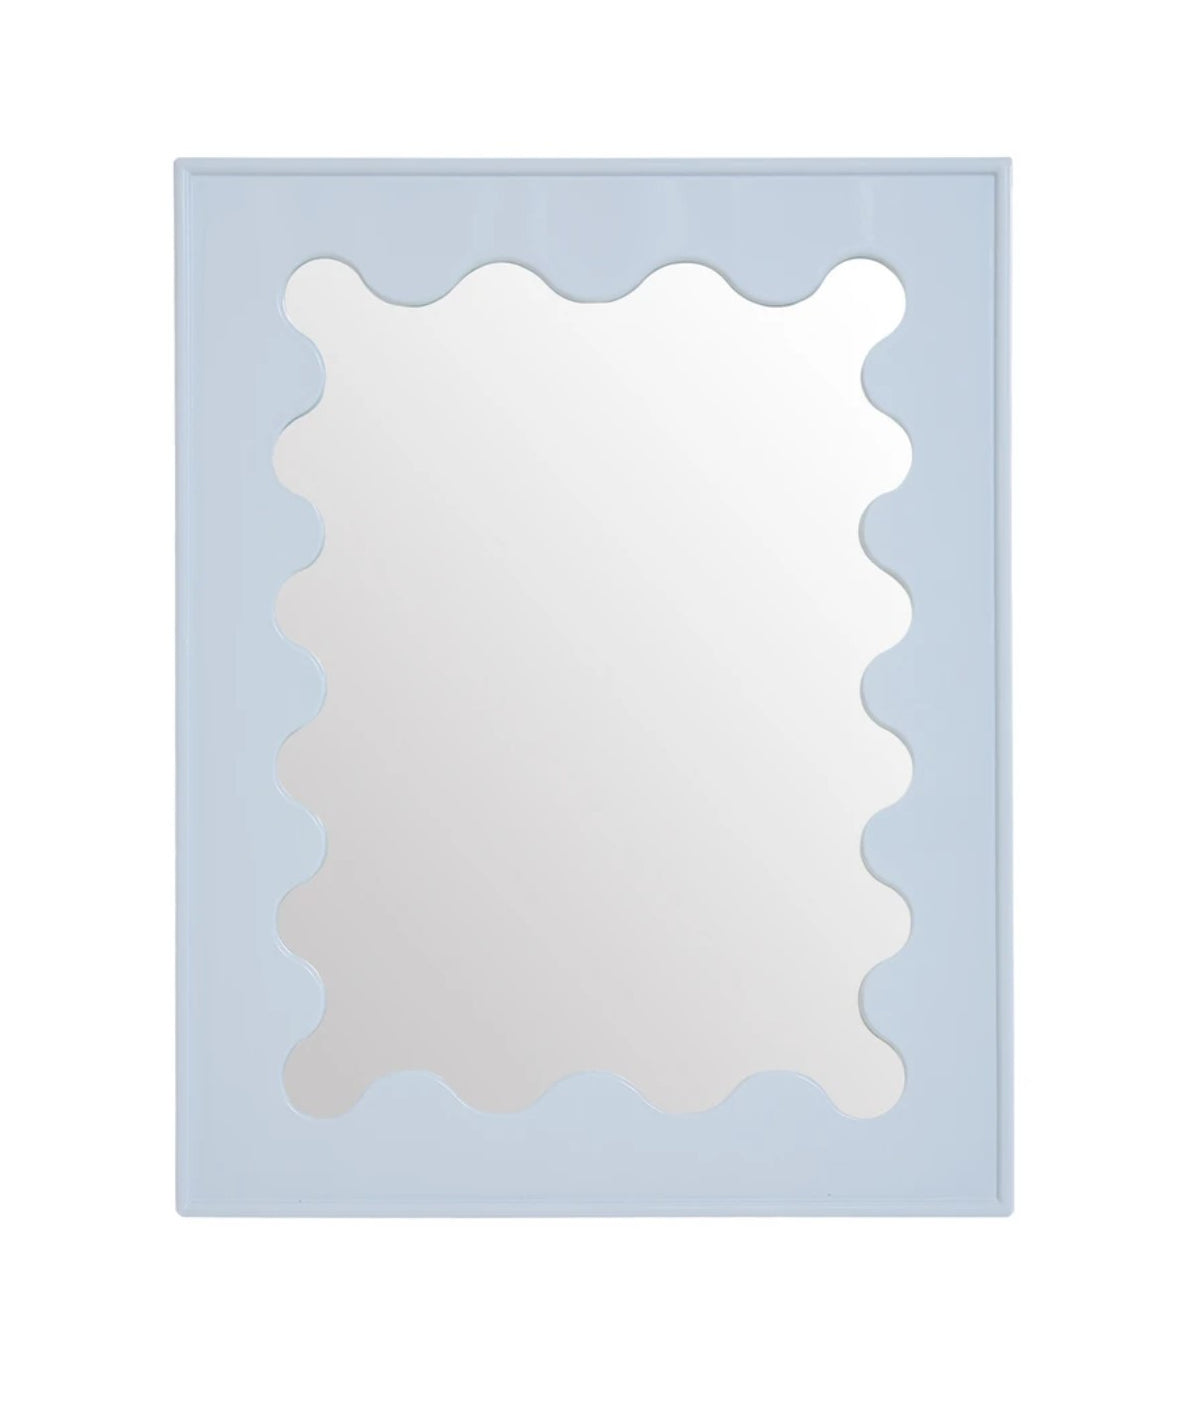 Ripple Lacquer Mirror by Jonathan Adler